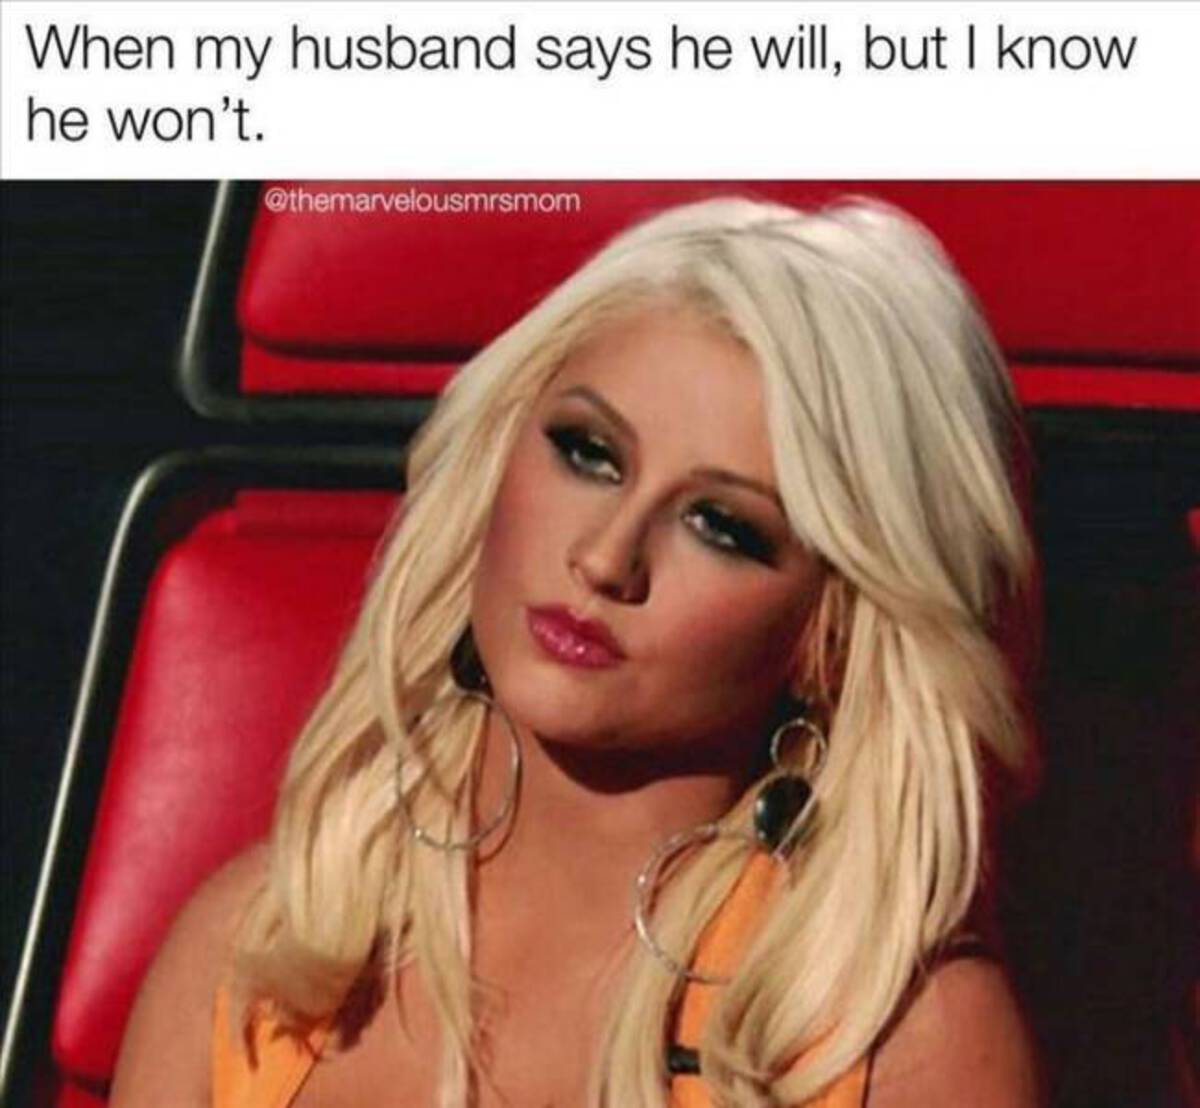 christina aguilera meme - When my husband says he will, but I know he won't.